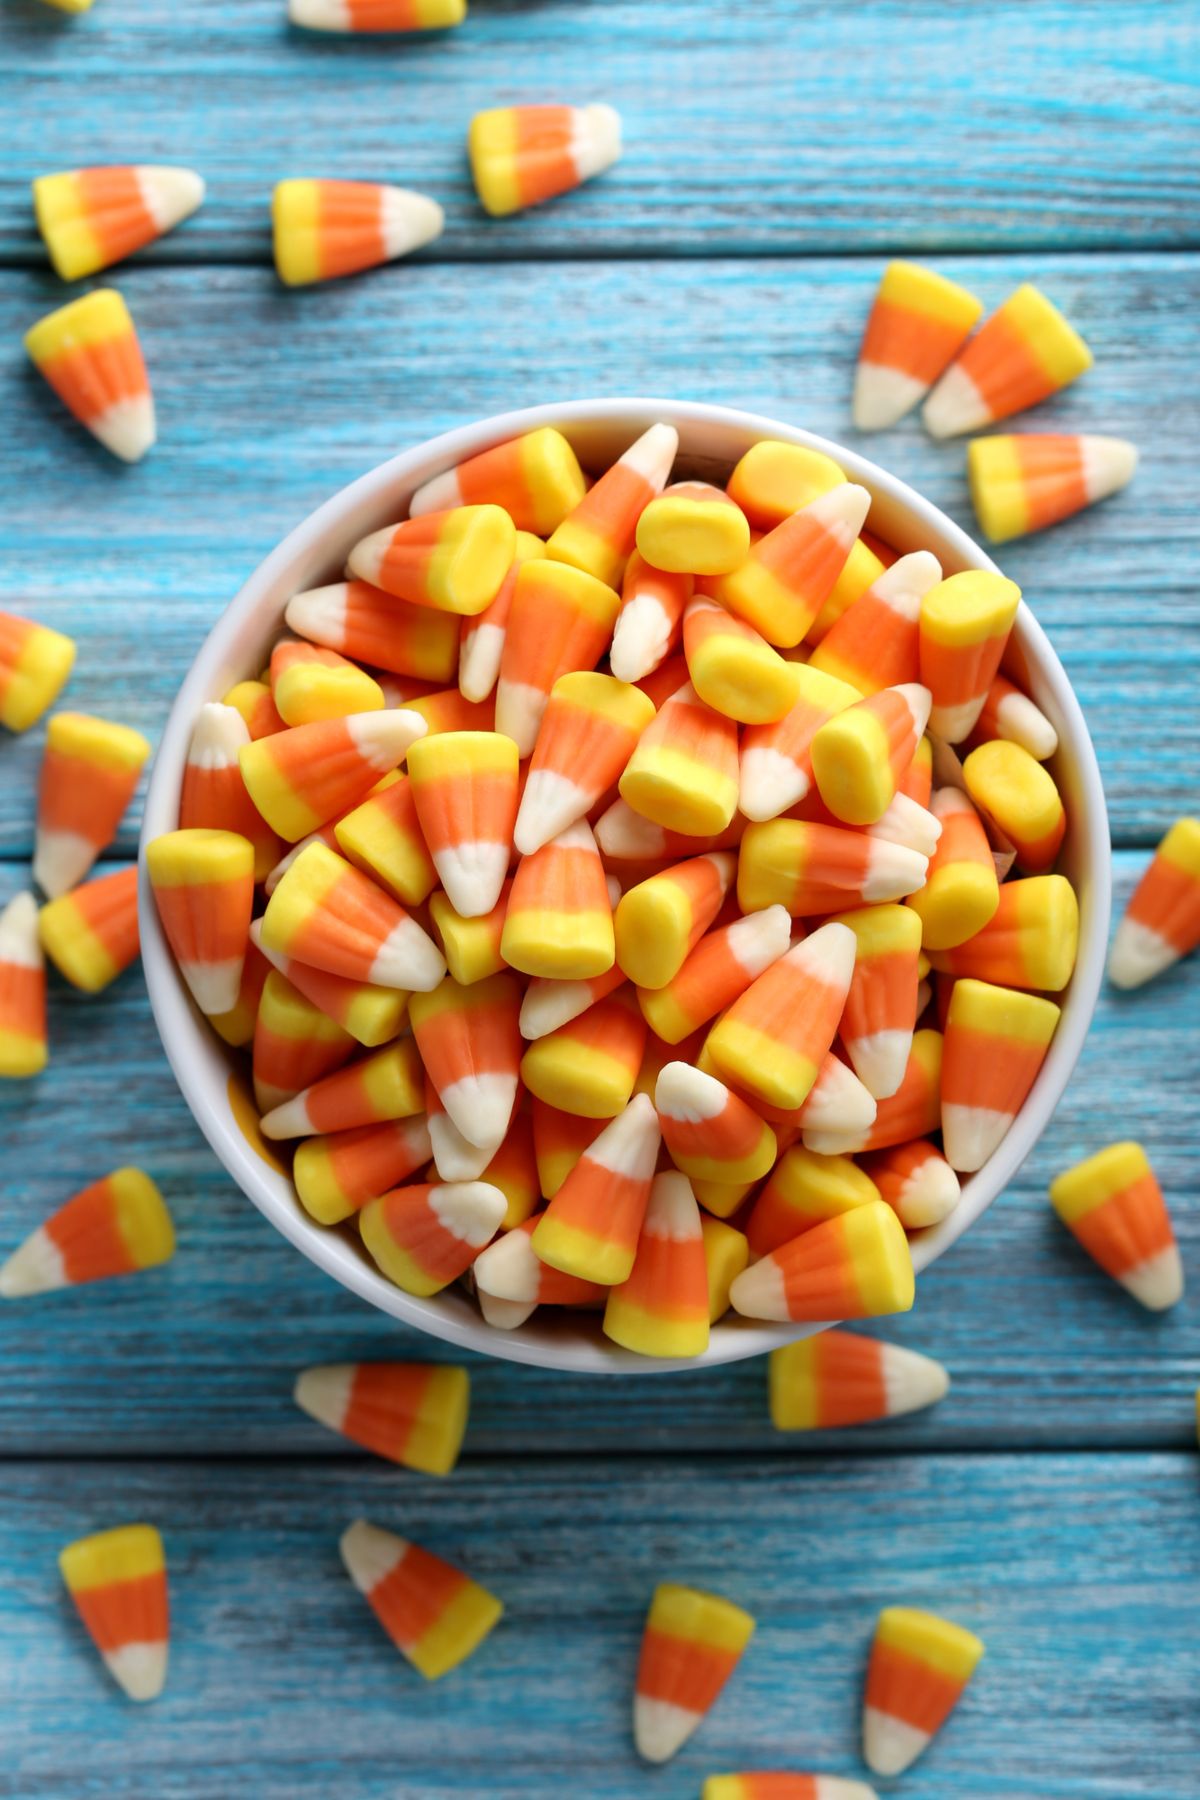 Maths Candy Corn Counting Game